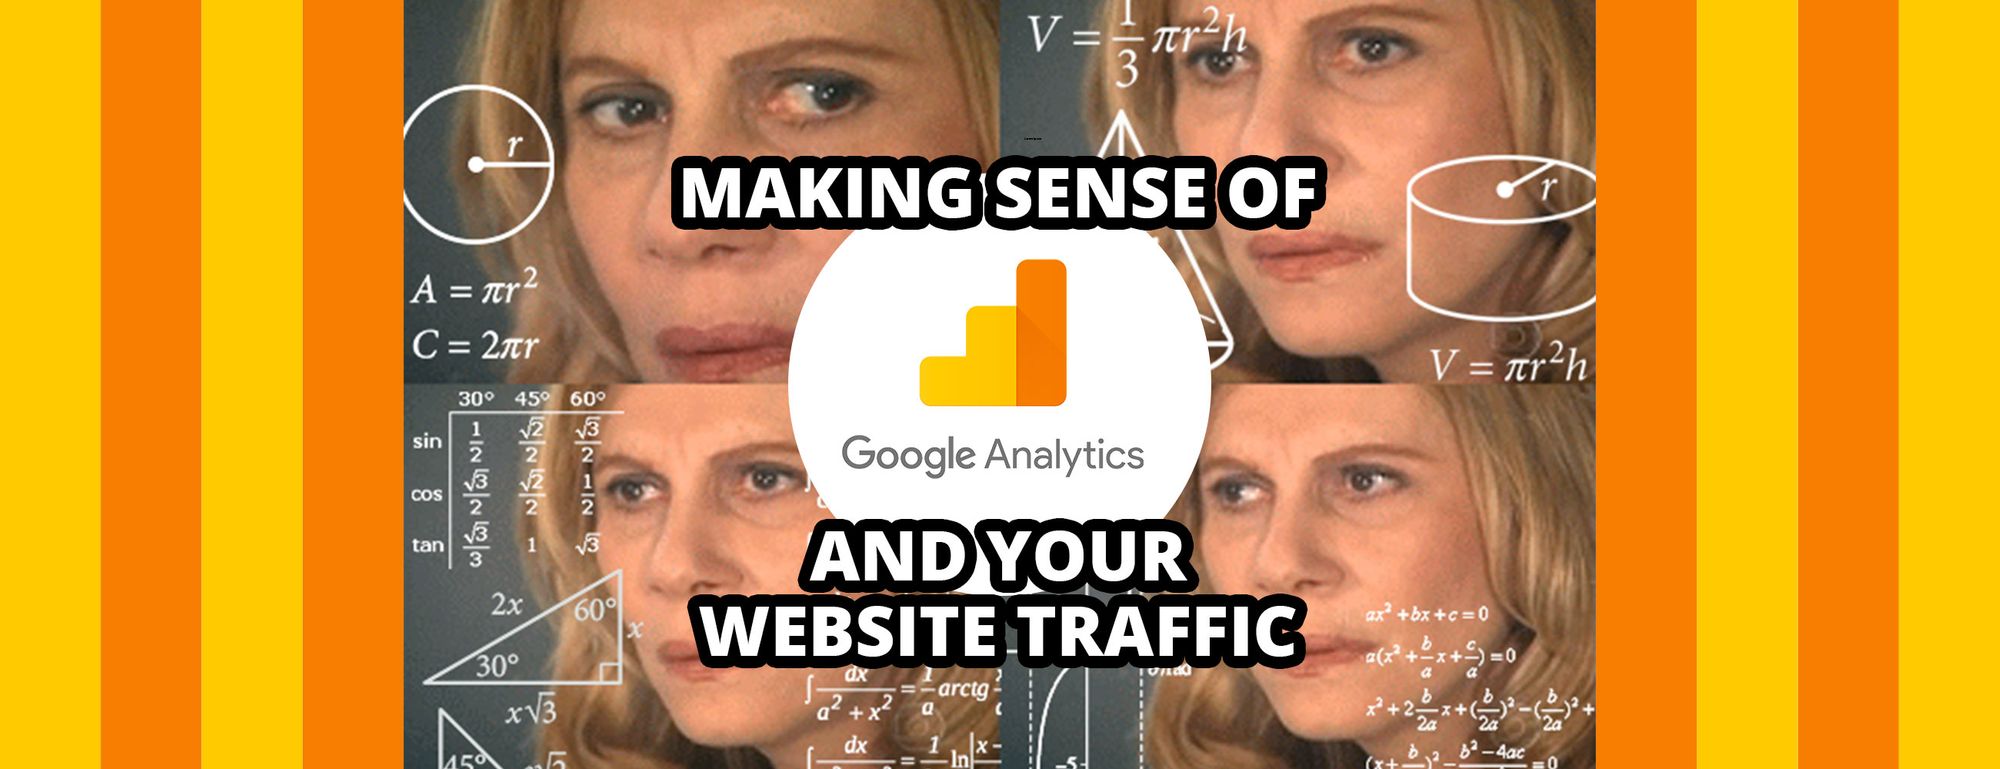 How to Make Sense of Google Analytics and the Traffic to Your Website